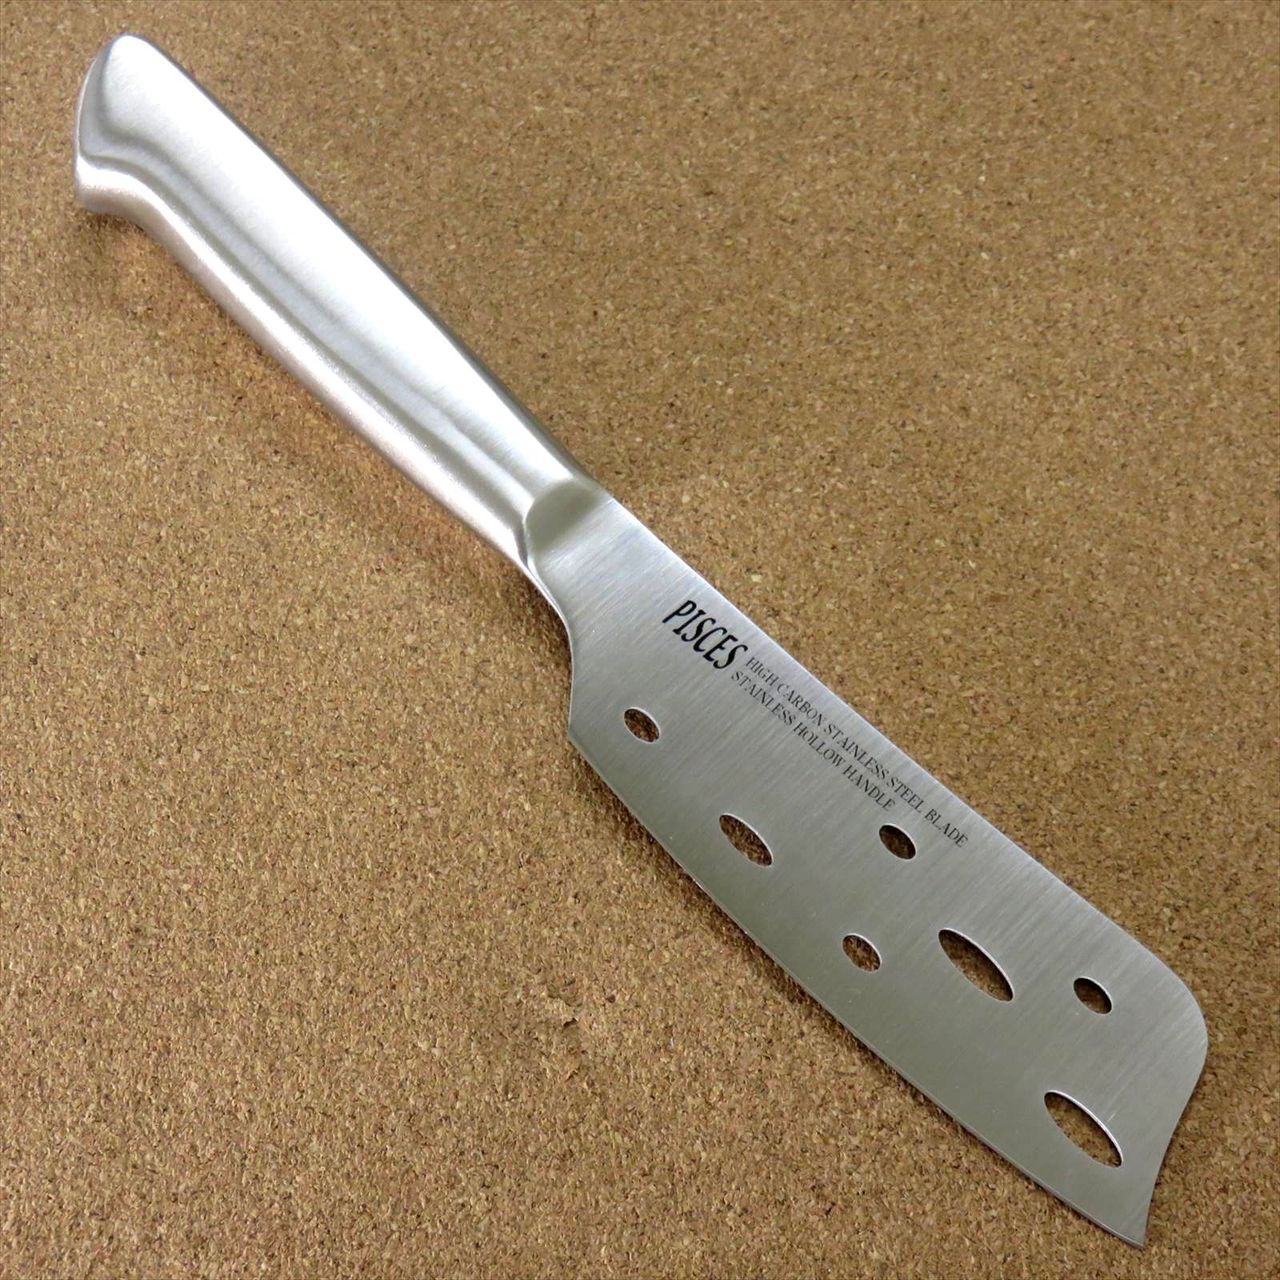 Japanese Pisces Kitchen Cheese Knife 120mm 4.7 inch Stainless Handle SEKI JAPAN